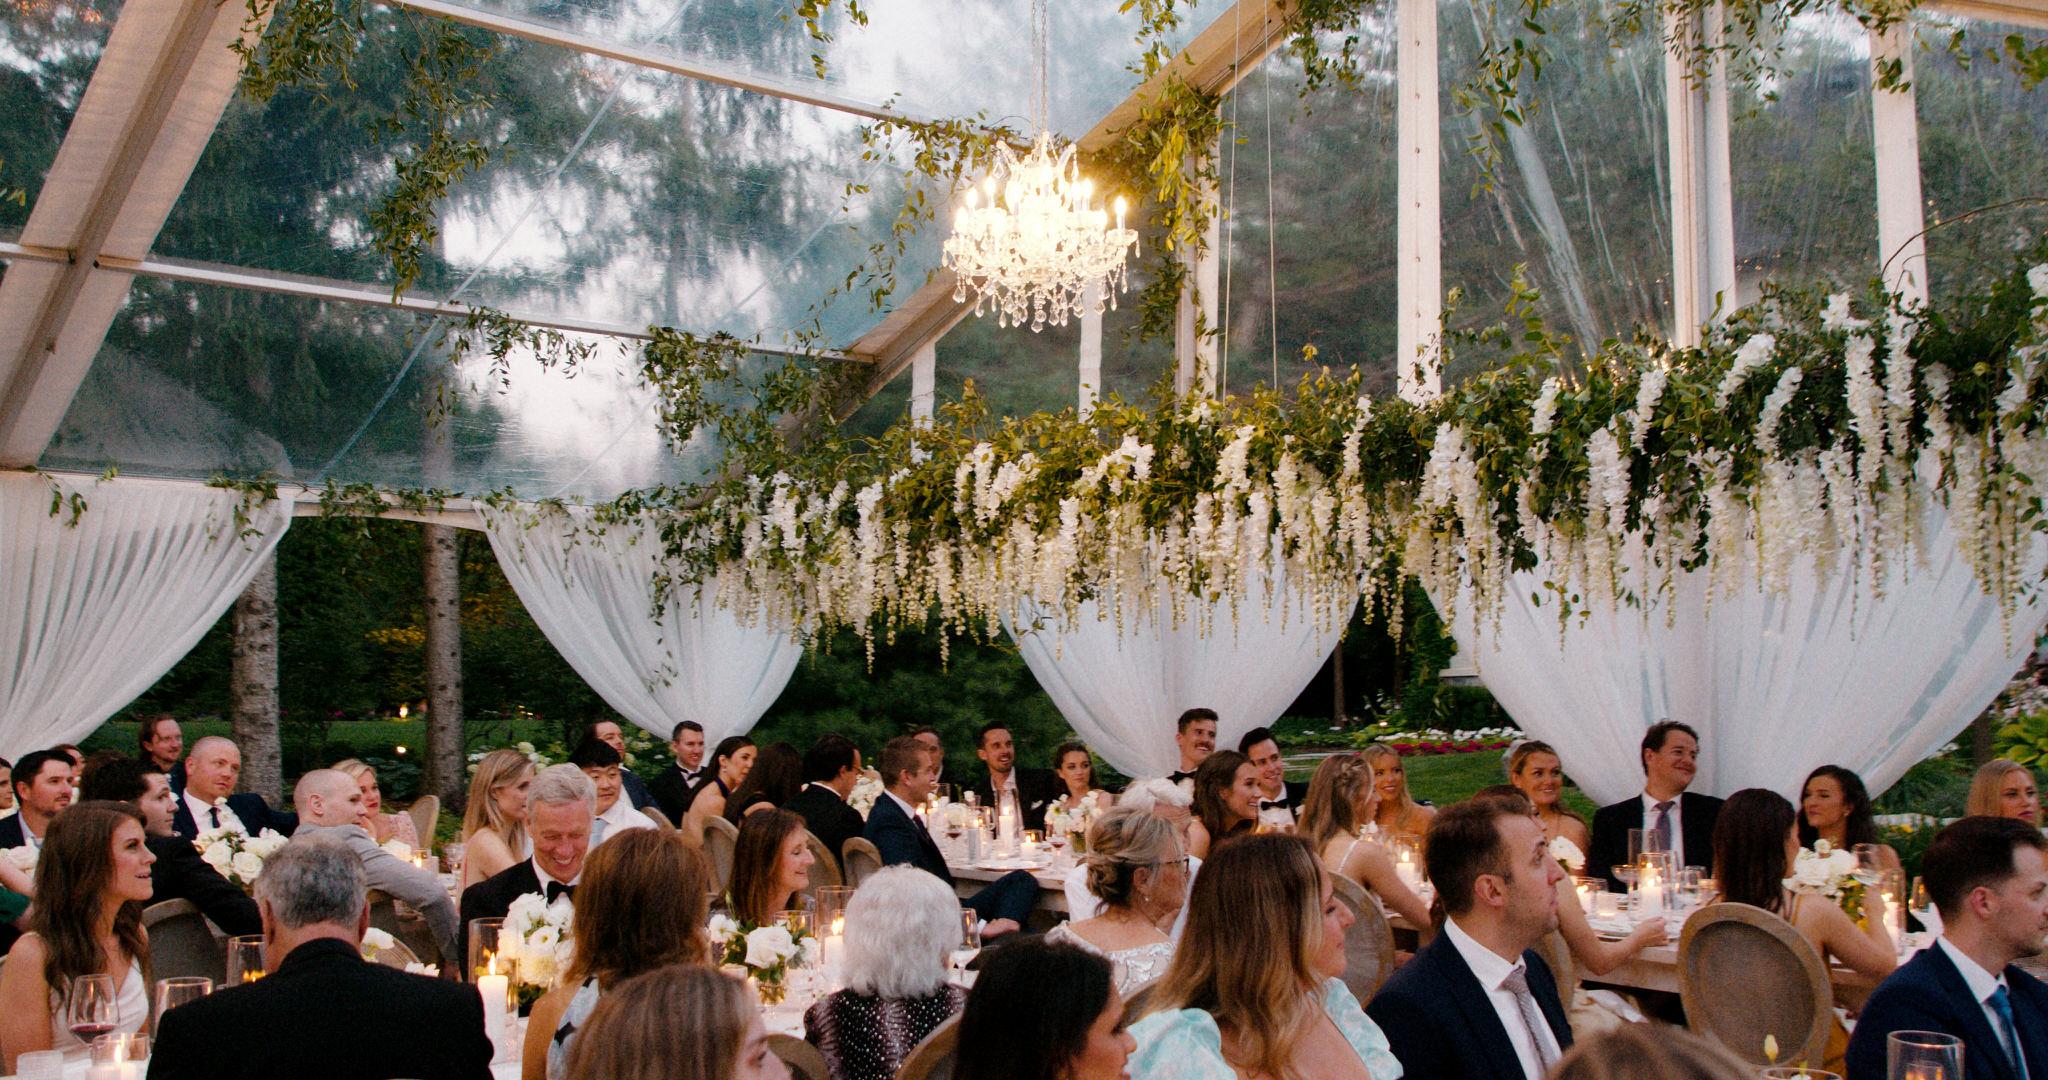 tented wedding reception with beautiful floral installation